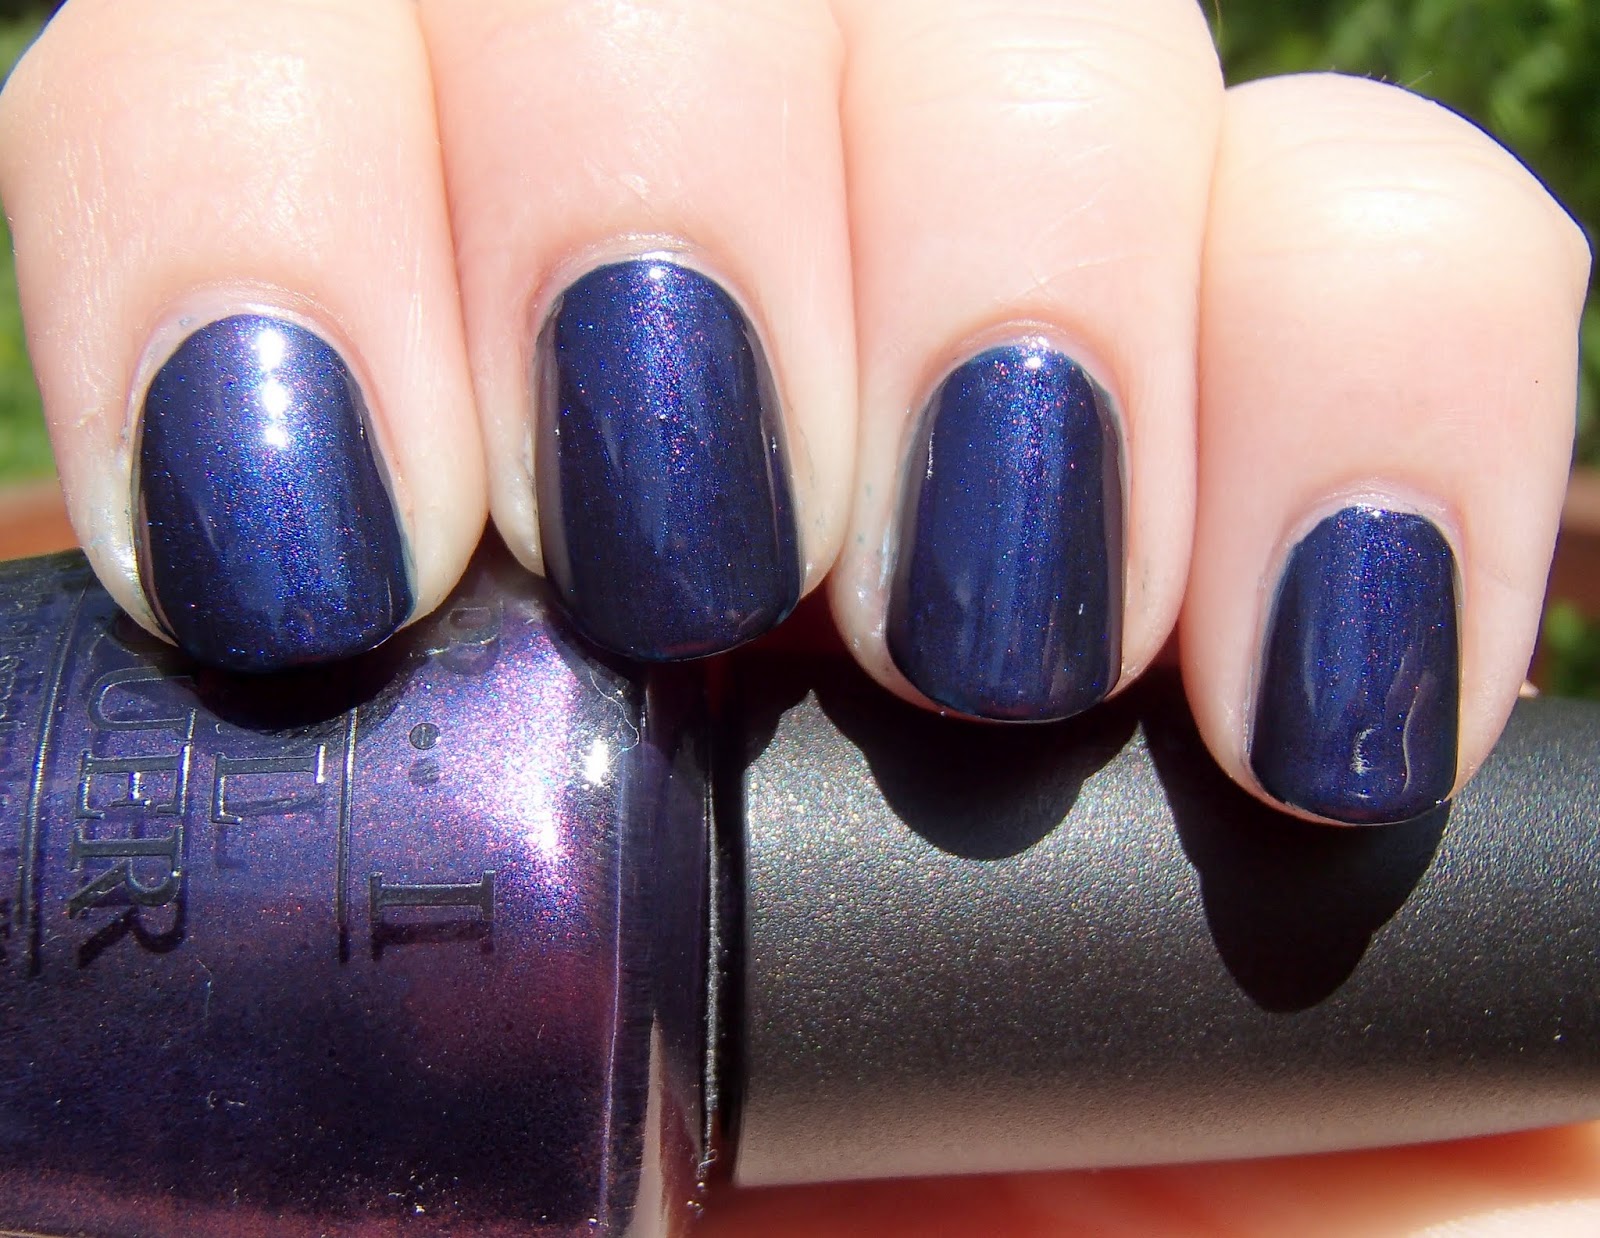 3. OPI Russian Navy - wide 2